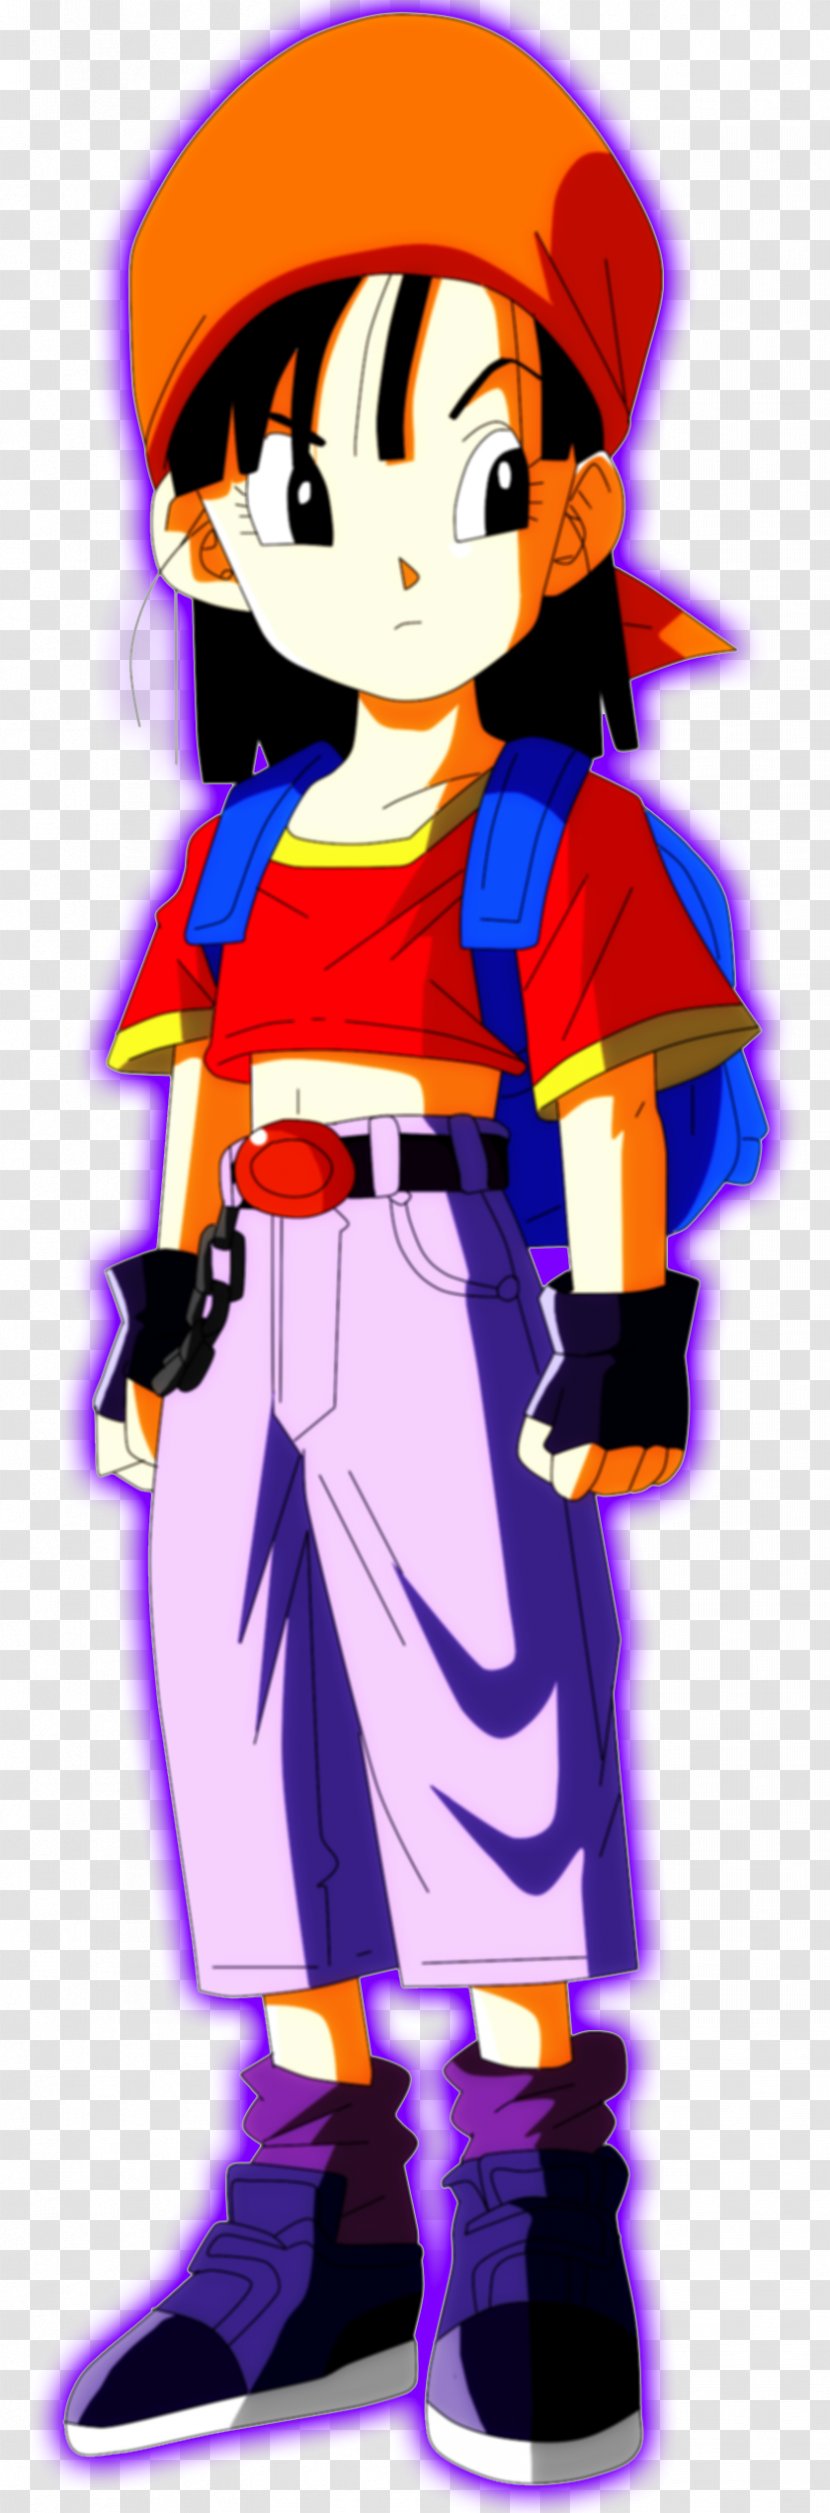 Pan Dende Dragon Ball Character - Silhouette Transparent PNG